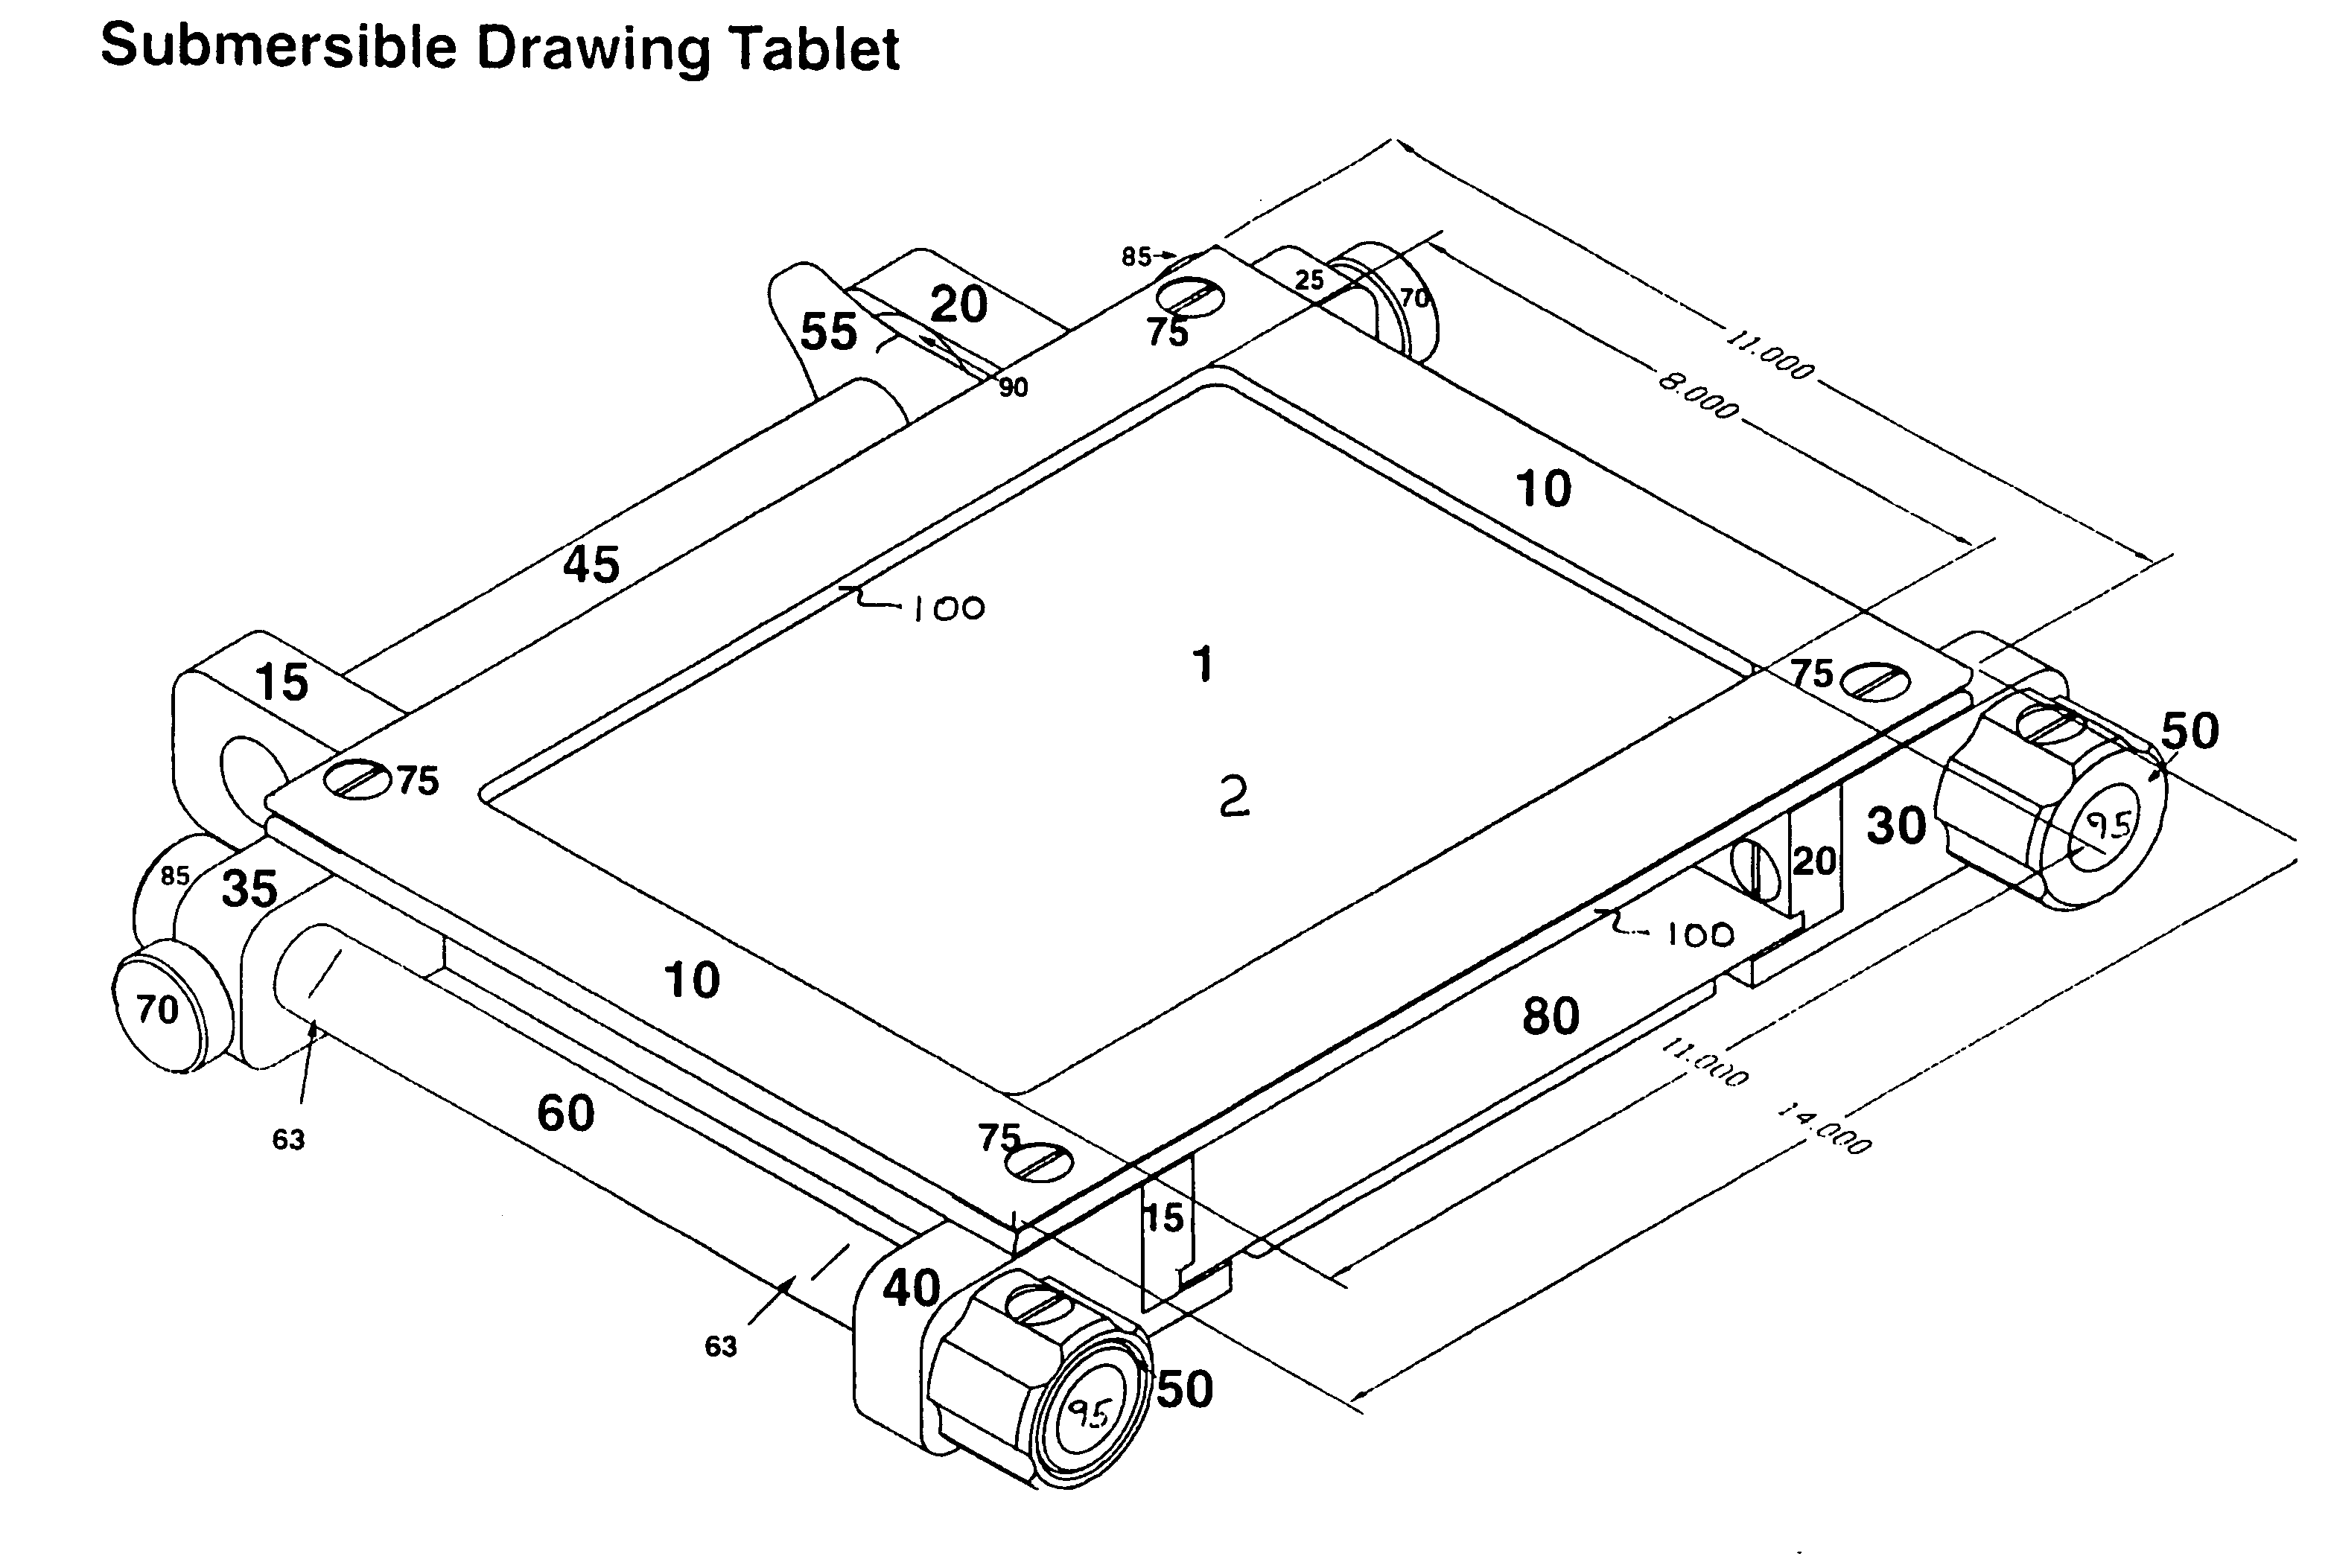 Drawing tablet for underwater or extreme environment